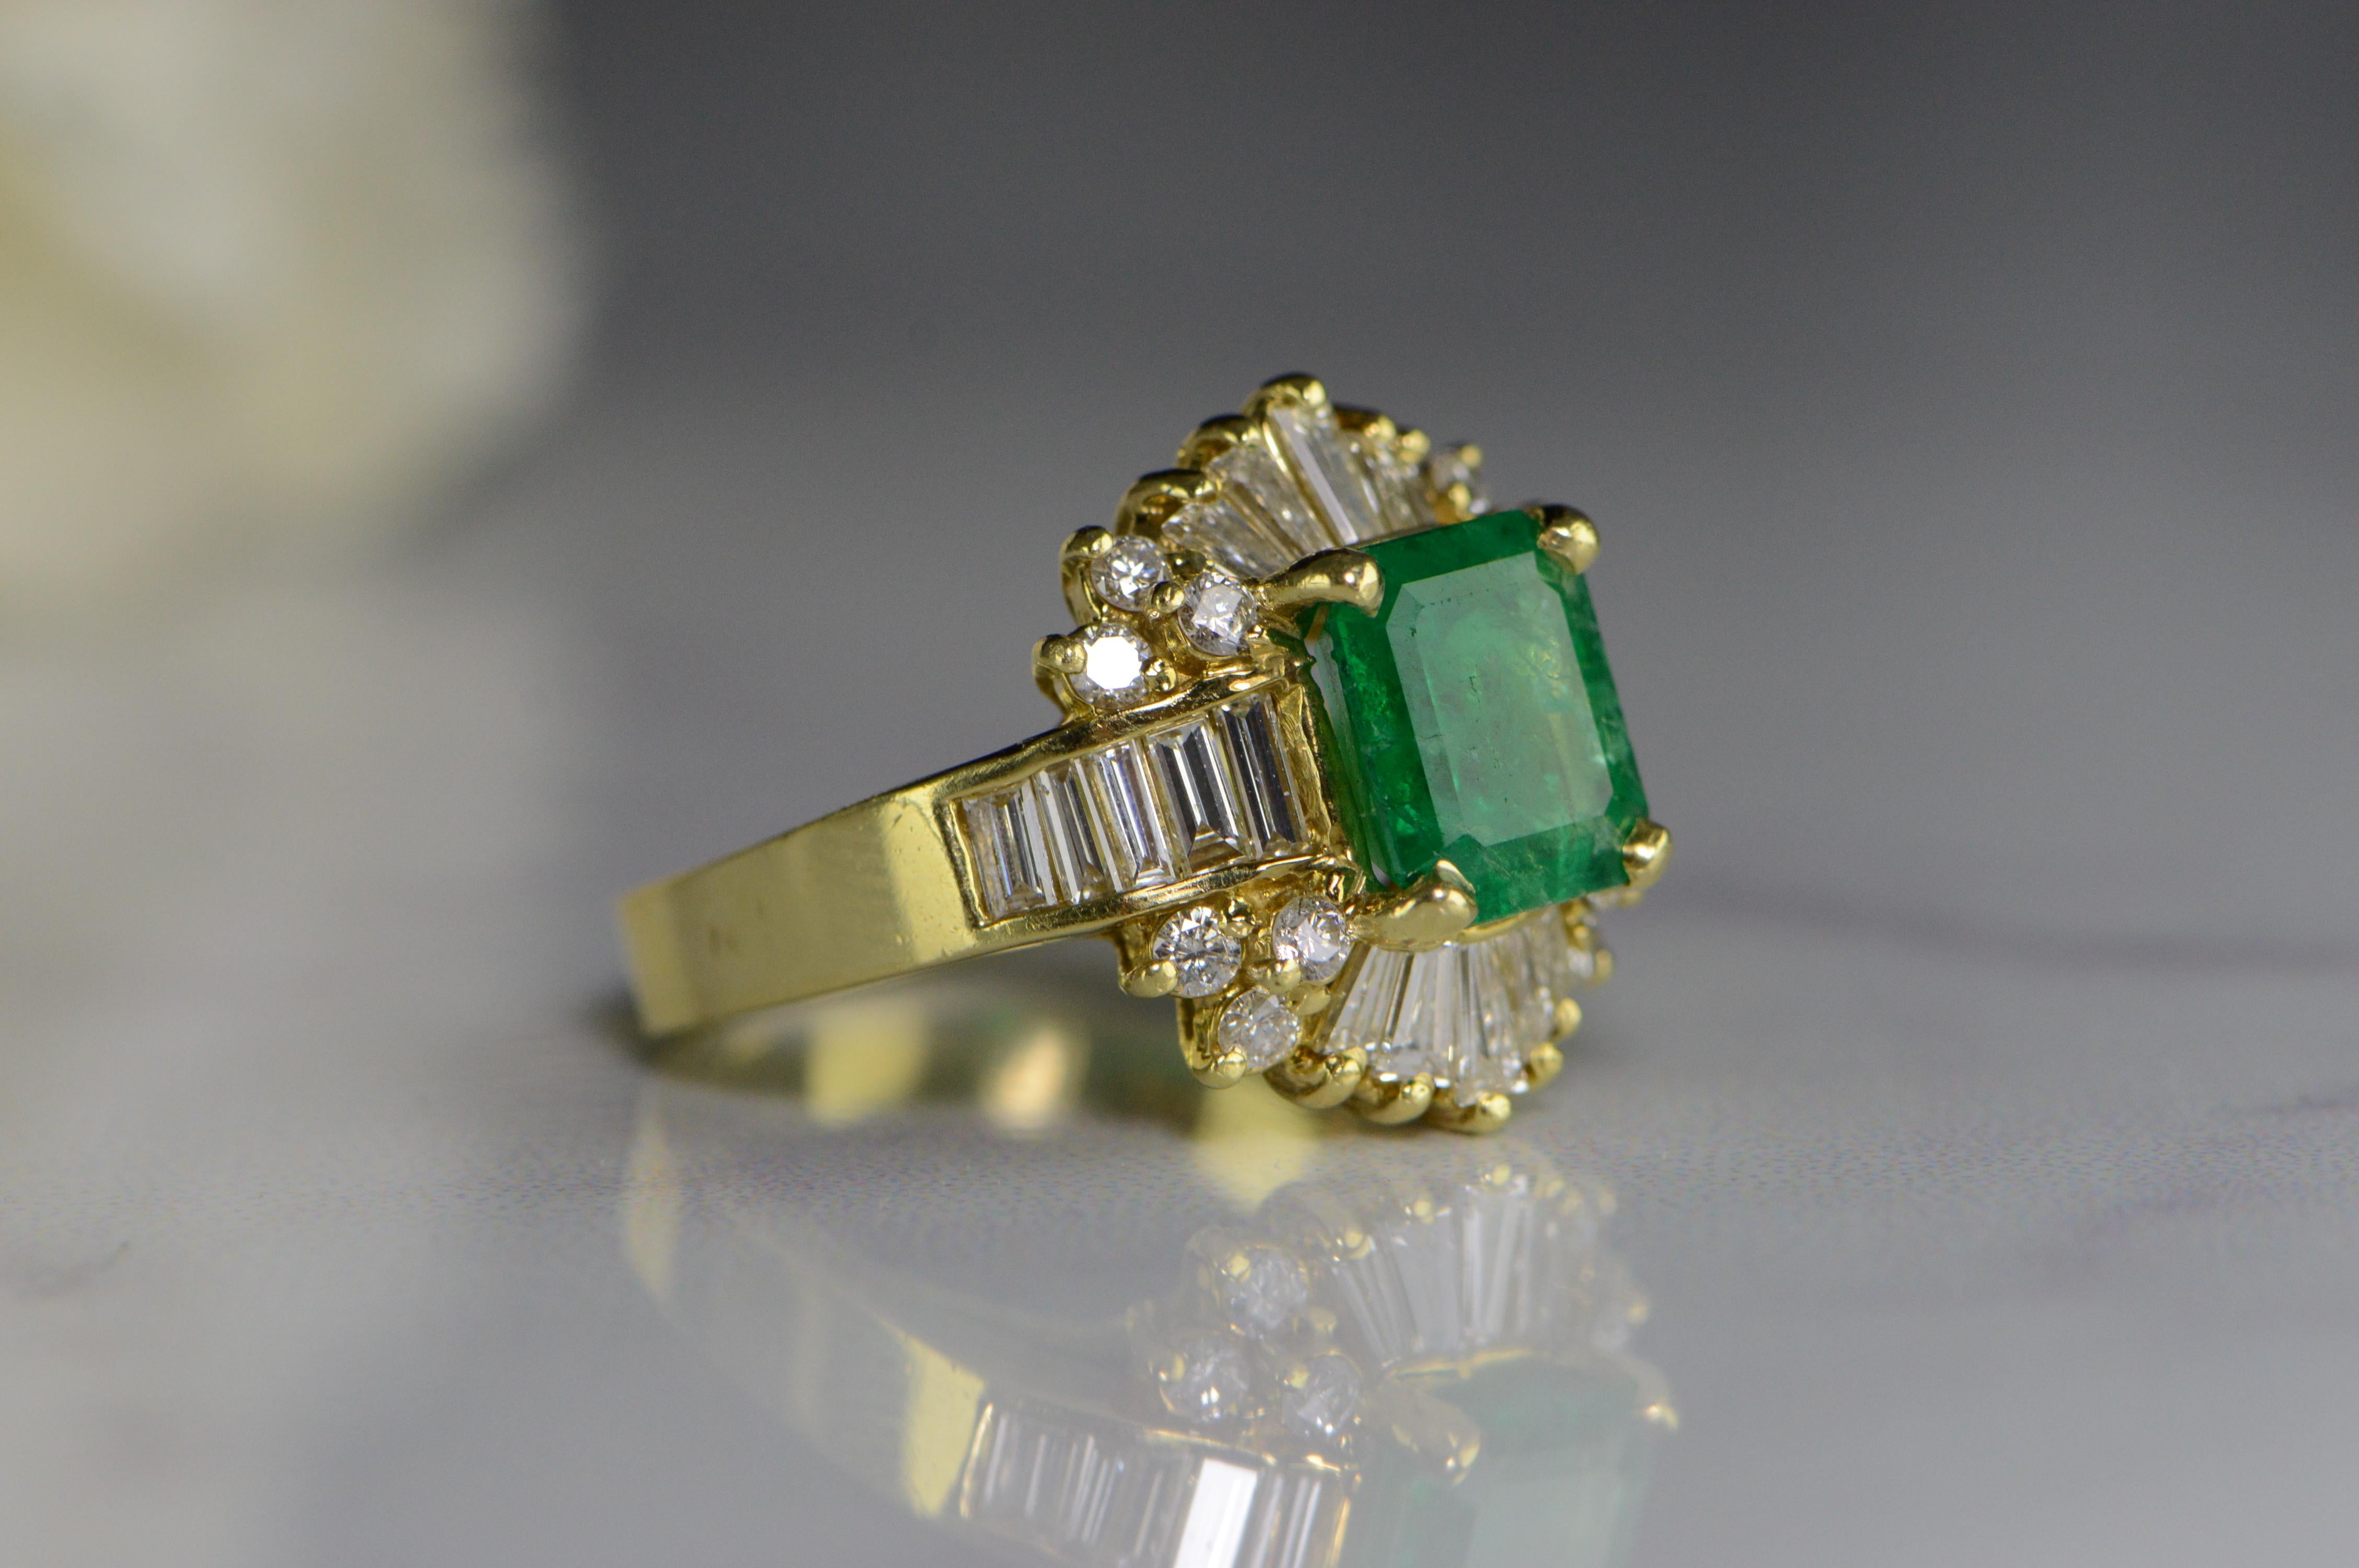 All diamonds are graded according to GIA grading standards. (When applicable)  
·Item: 18K 2.17 Ct Emerald 1.47 Ctw Diamond Statement Ring Size 6 Yellow Gold  
·Era: Vintage / 1980s  
·Composition: 18k Gold Marked/Tested  
·Center Gem Stone: 2.17Ct